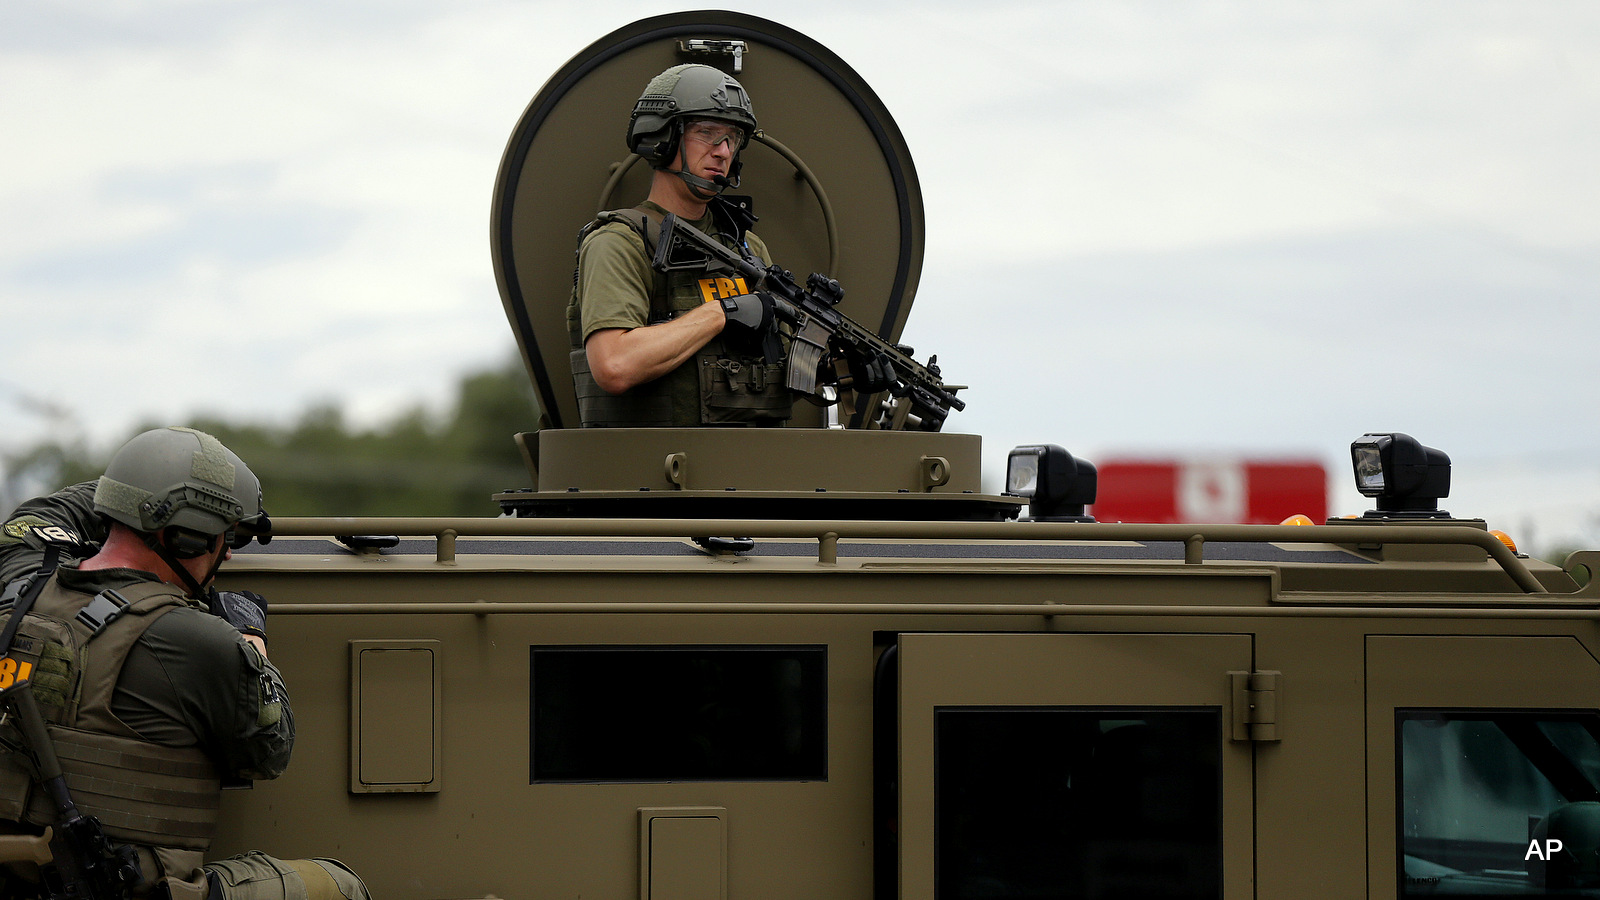 FBI patrol the perimeter of a crime scene in an armored vehicle in Baton Rouge, La., Sunday, July 17, 2016.